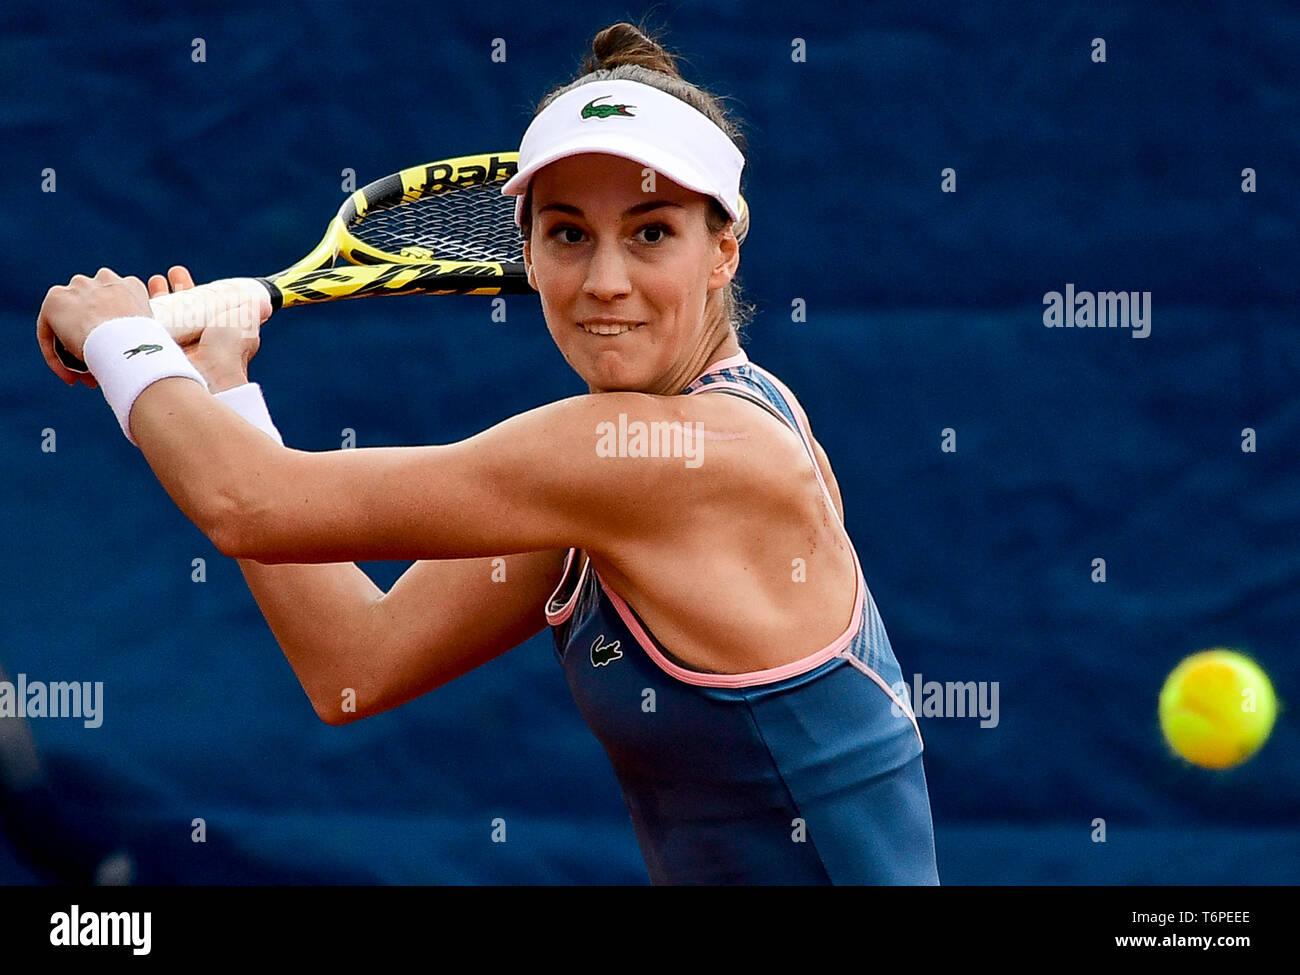 Prague, Czech Republic. 02nd May, 2019. Tennis player Bernada Pera of USA in action during the match against Wang Qiang of China in Prague Open women's tennis tournament, Czech Republic, May 2, 2019. Credit: Roman Vondrous/CTK Photo/Alamy Live News Stock Photo